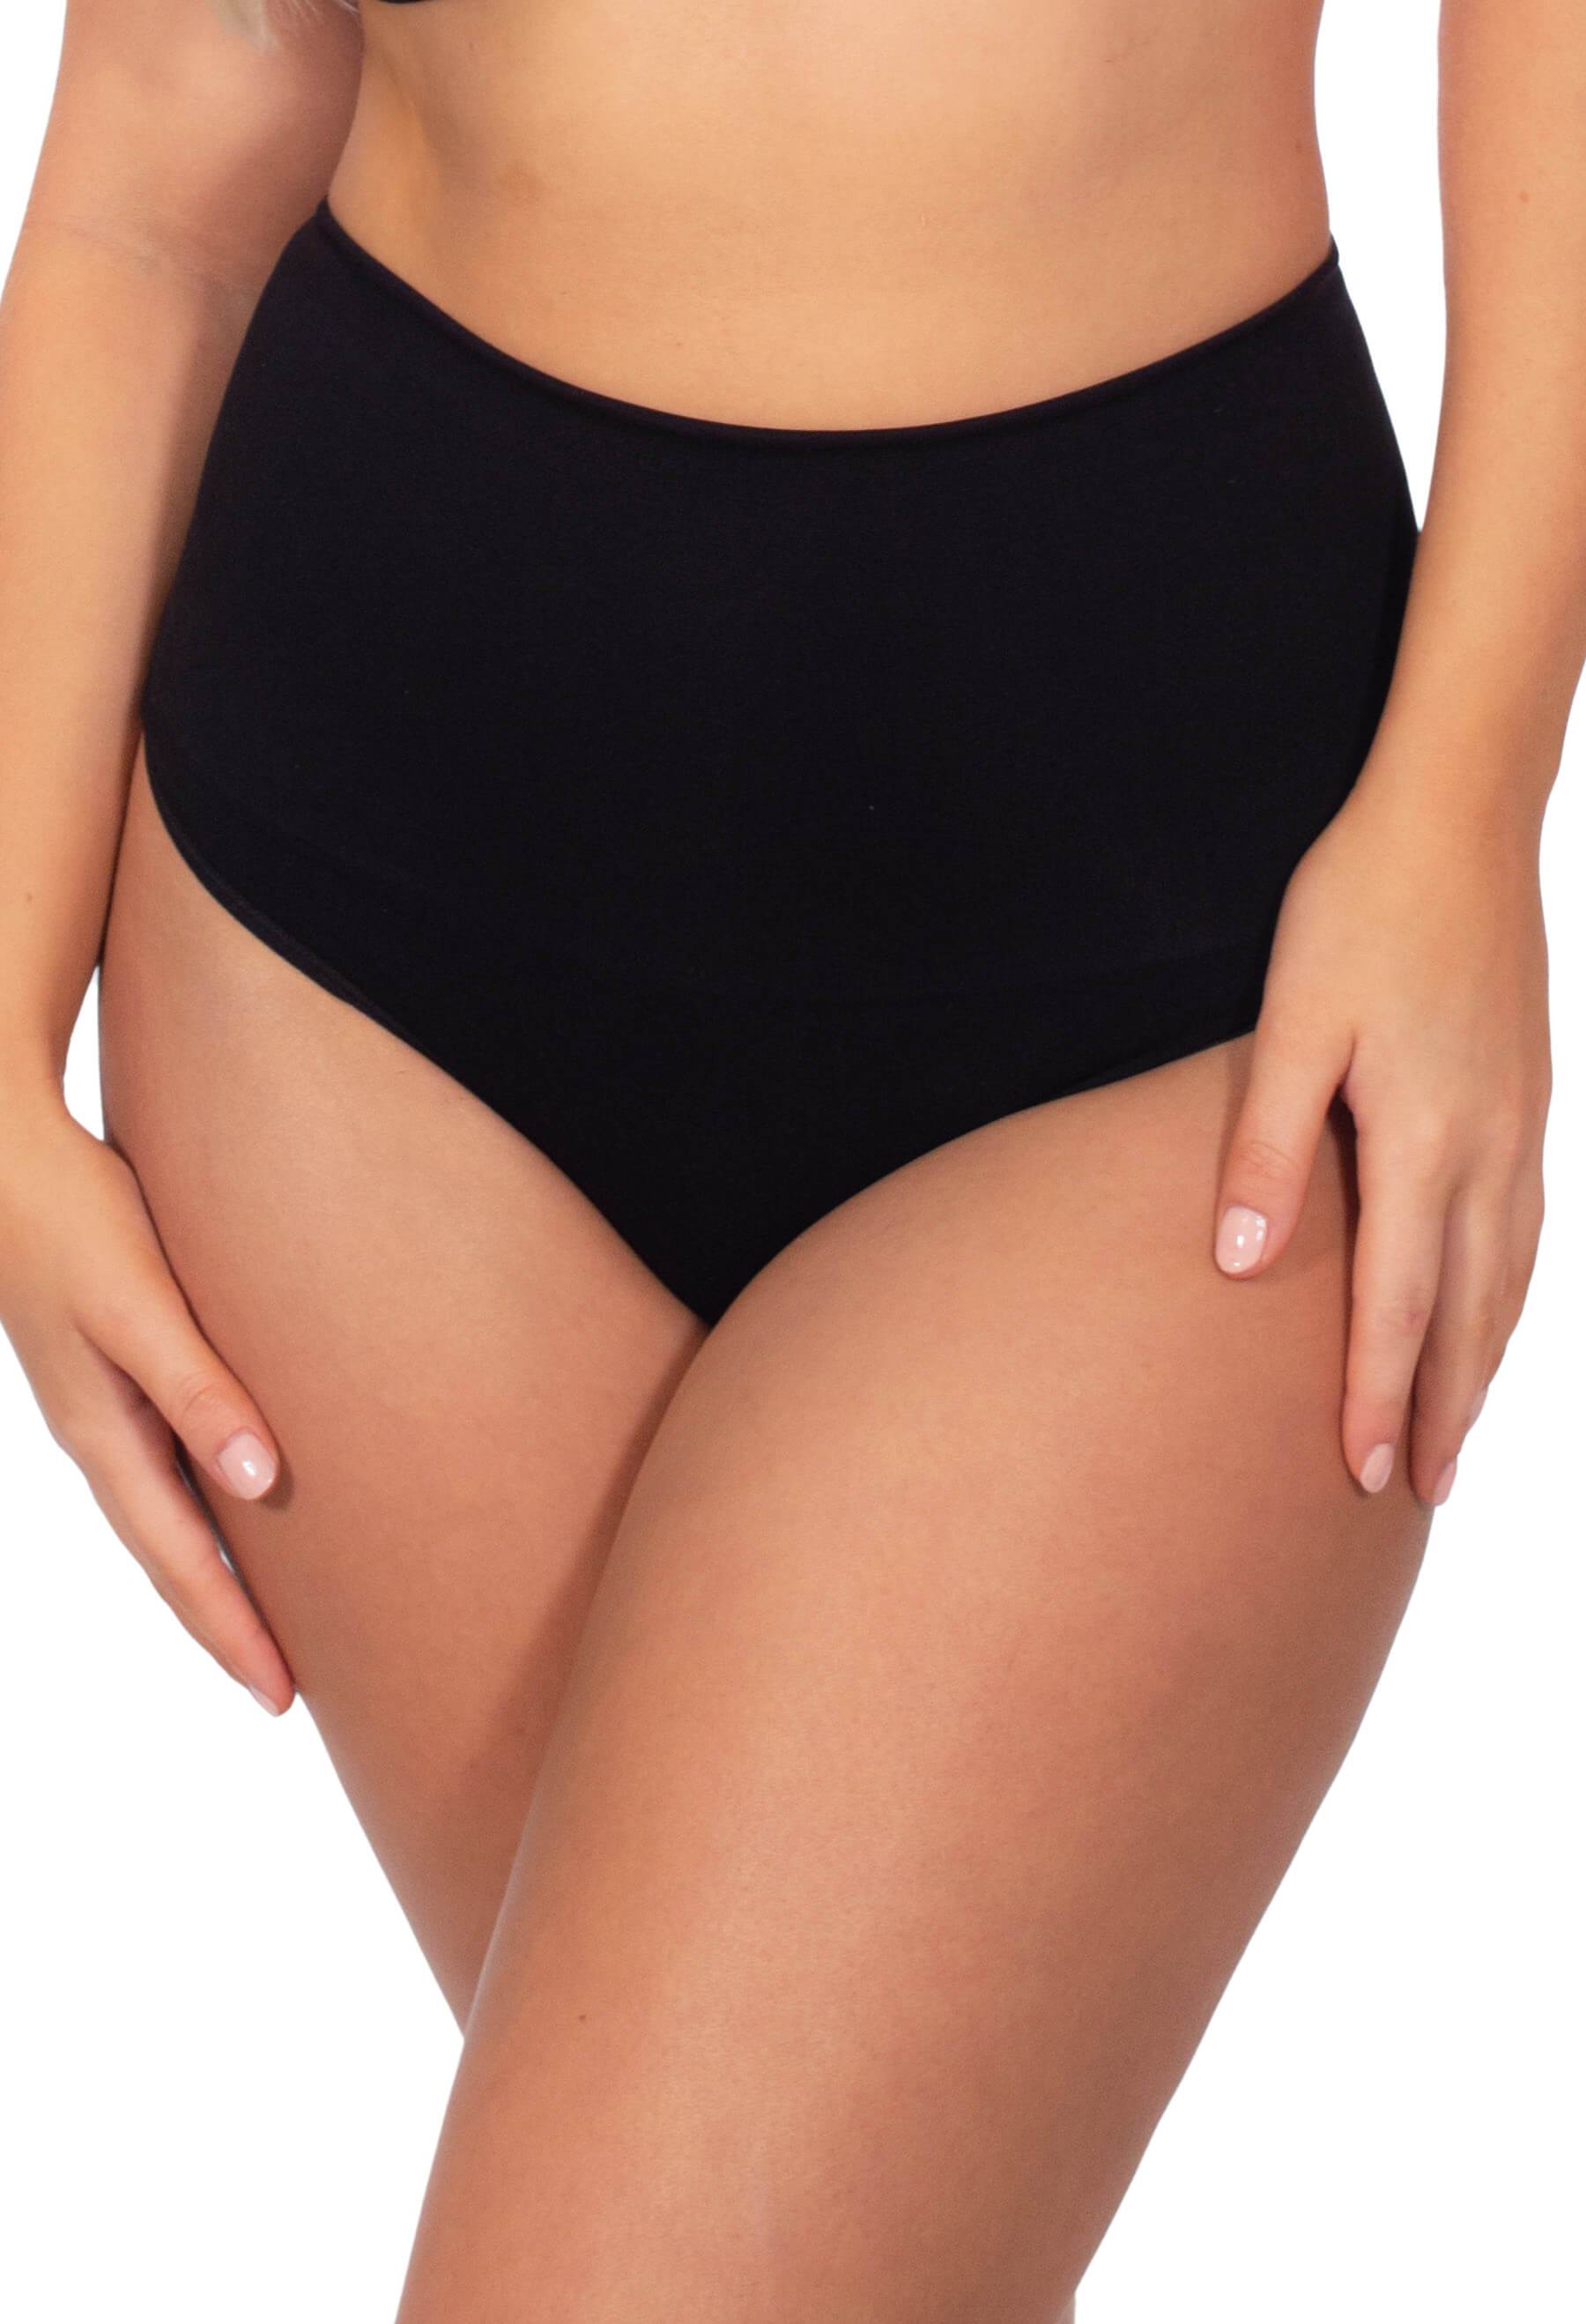 Super Sales! Spanx Everyday Shaping Panties Thong, Underwear & Intimates, Free Shipping